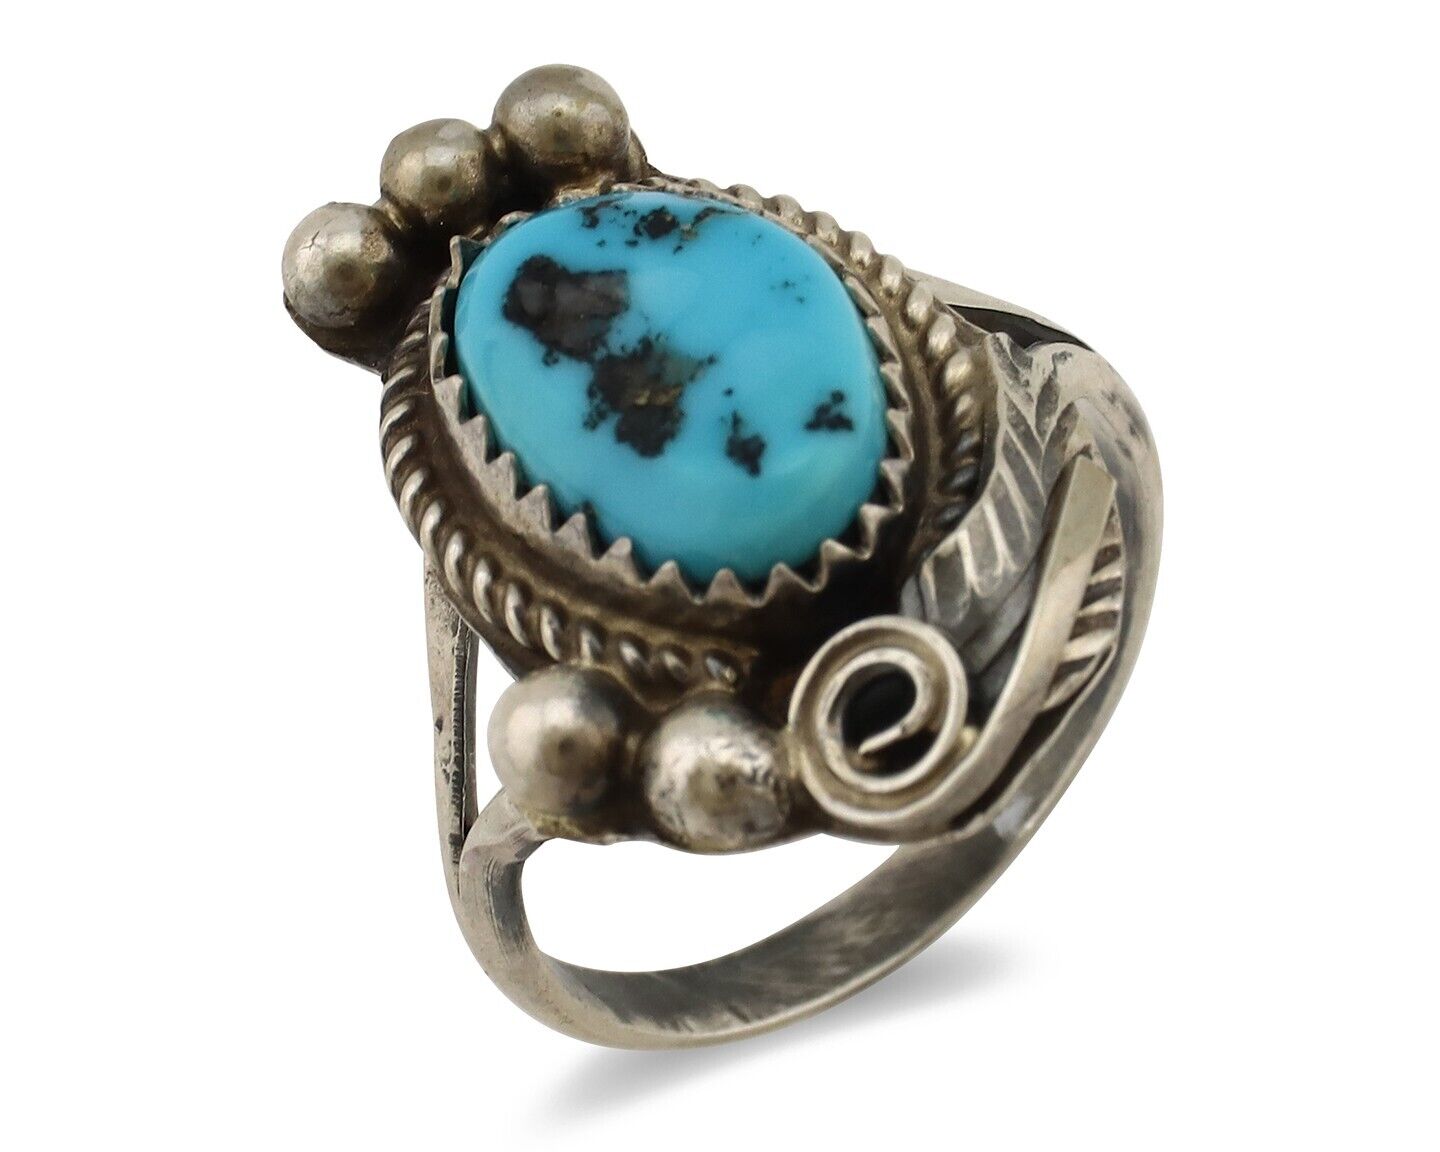 Navajo Ring 925 Silver Sleeping Beauty Turquoise Signed Justin Morris C.80's